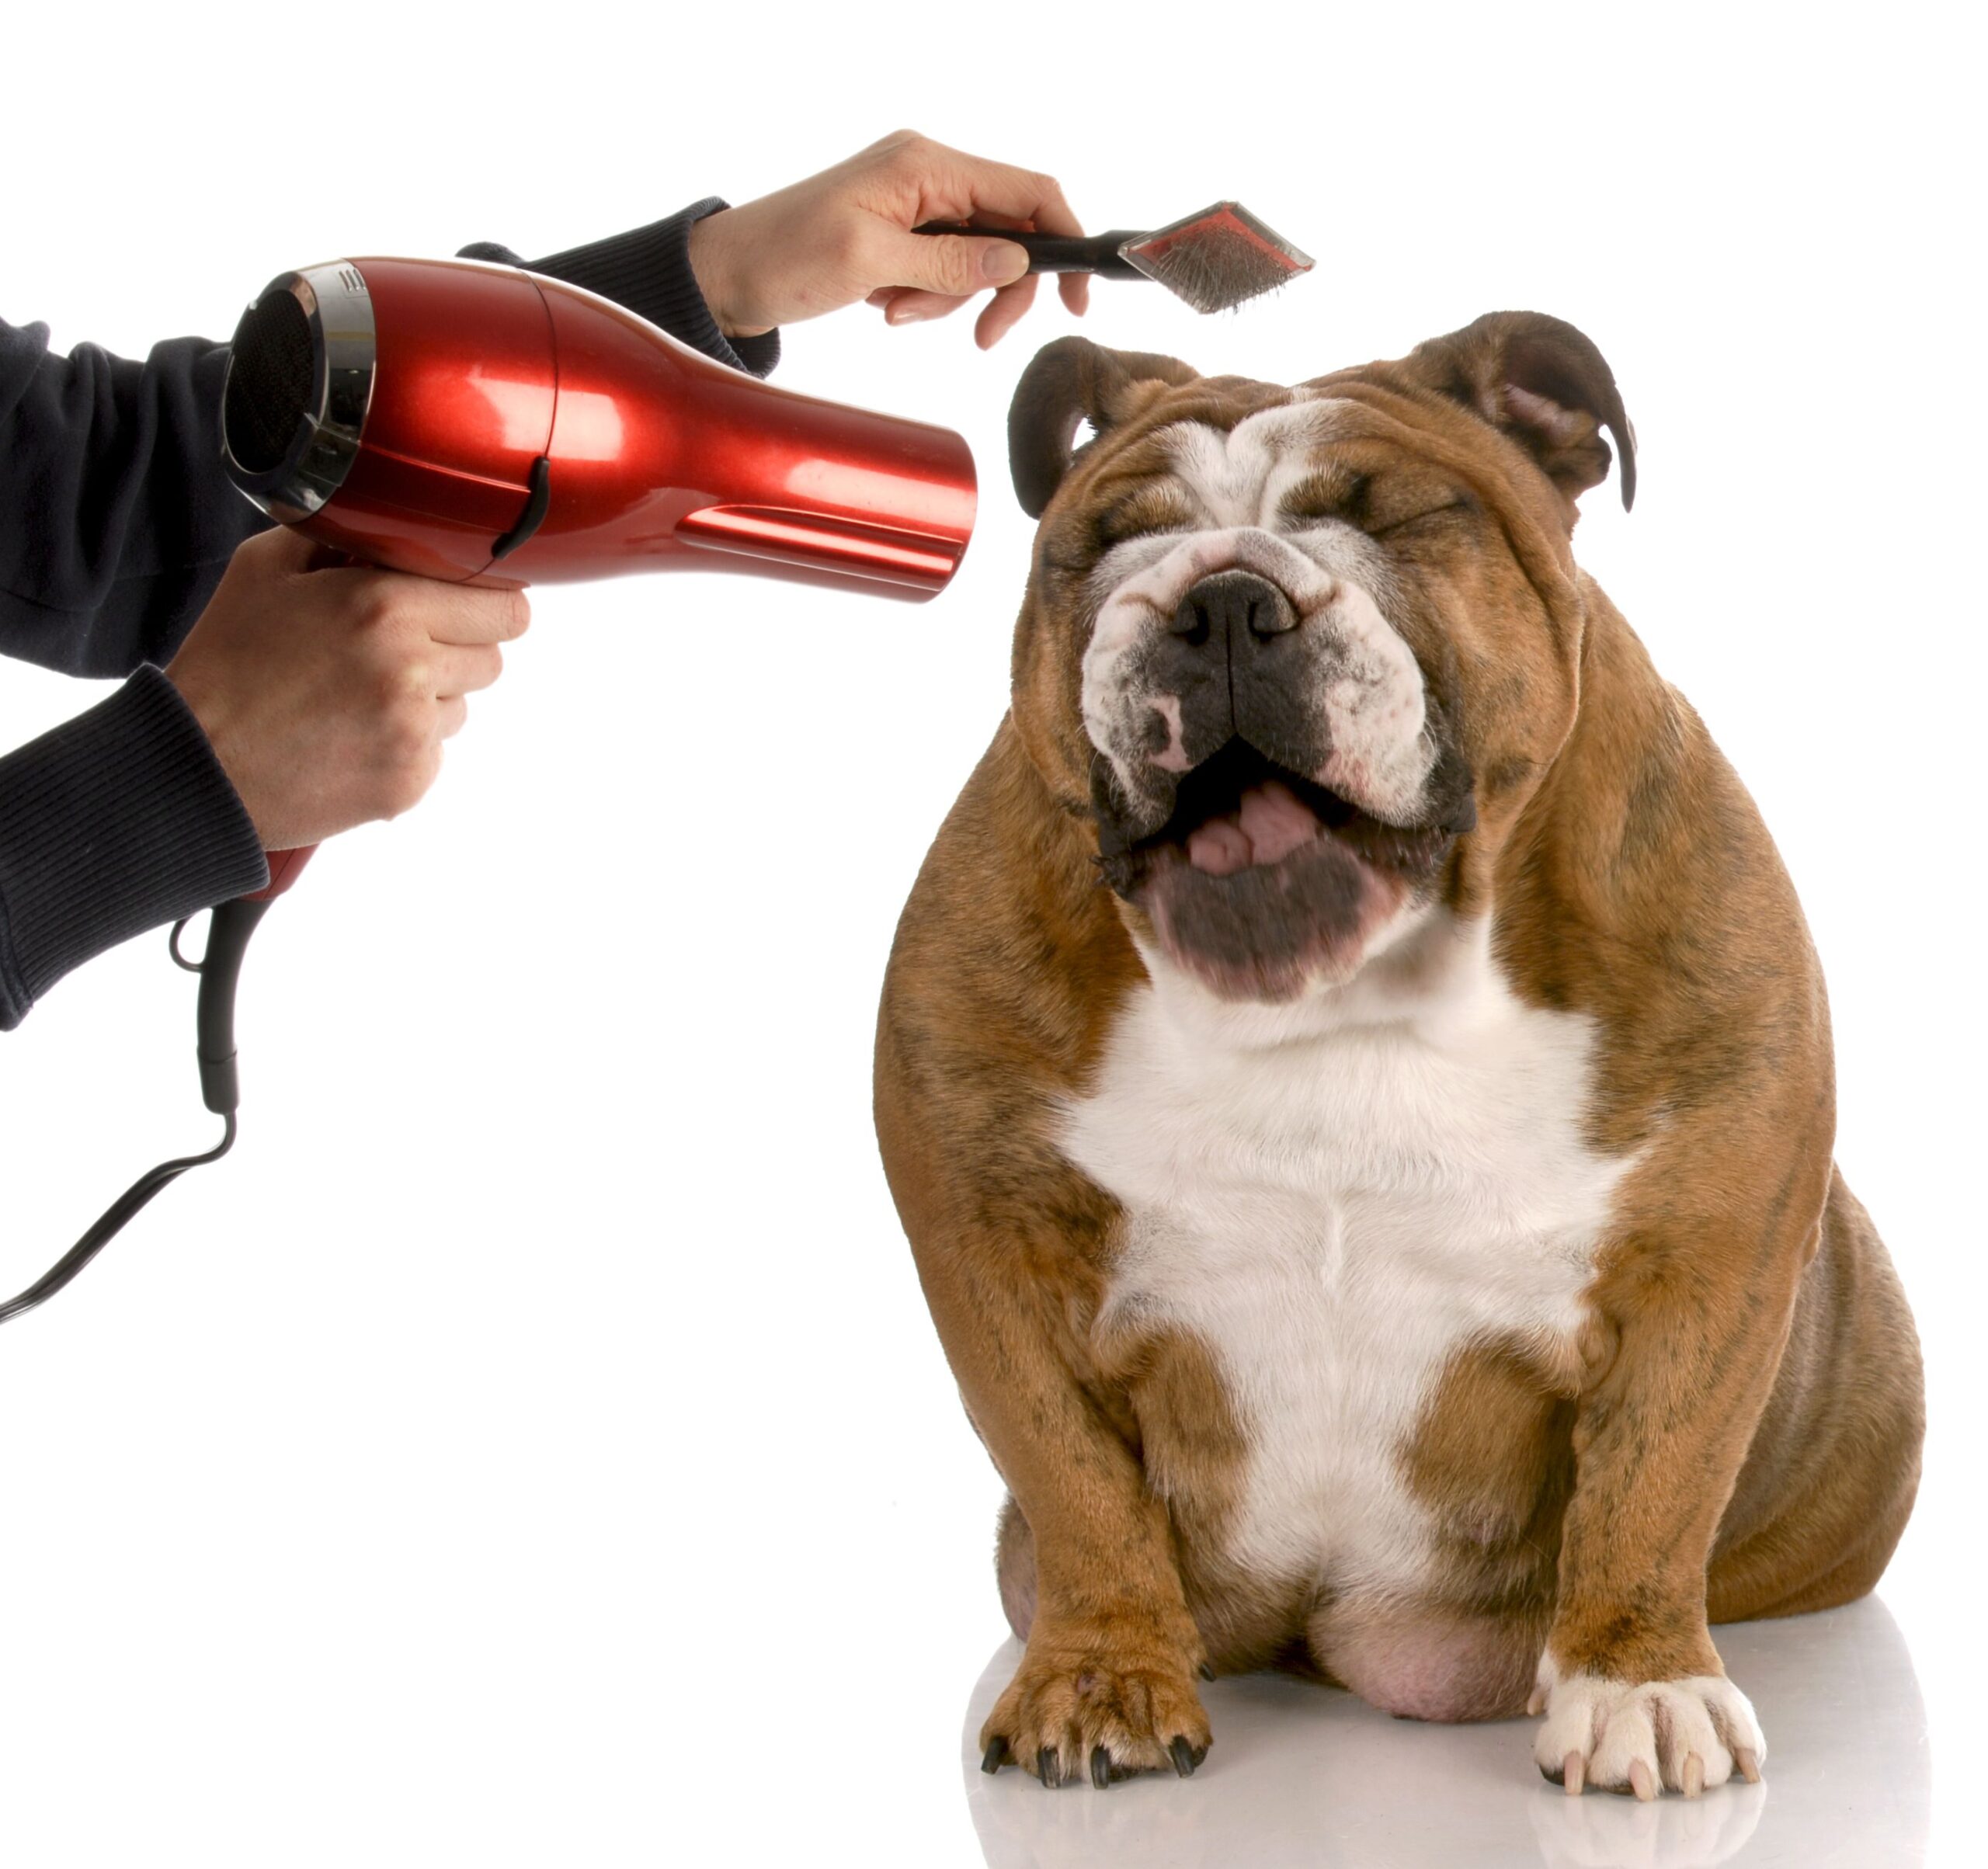 6167973 - dog getting groomed - english bulldog laughing while being brushed